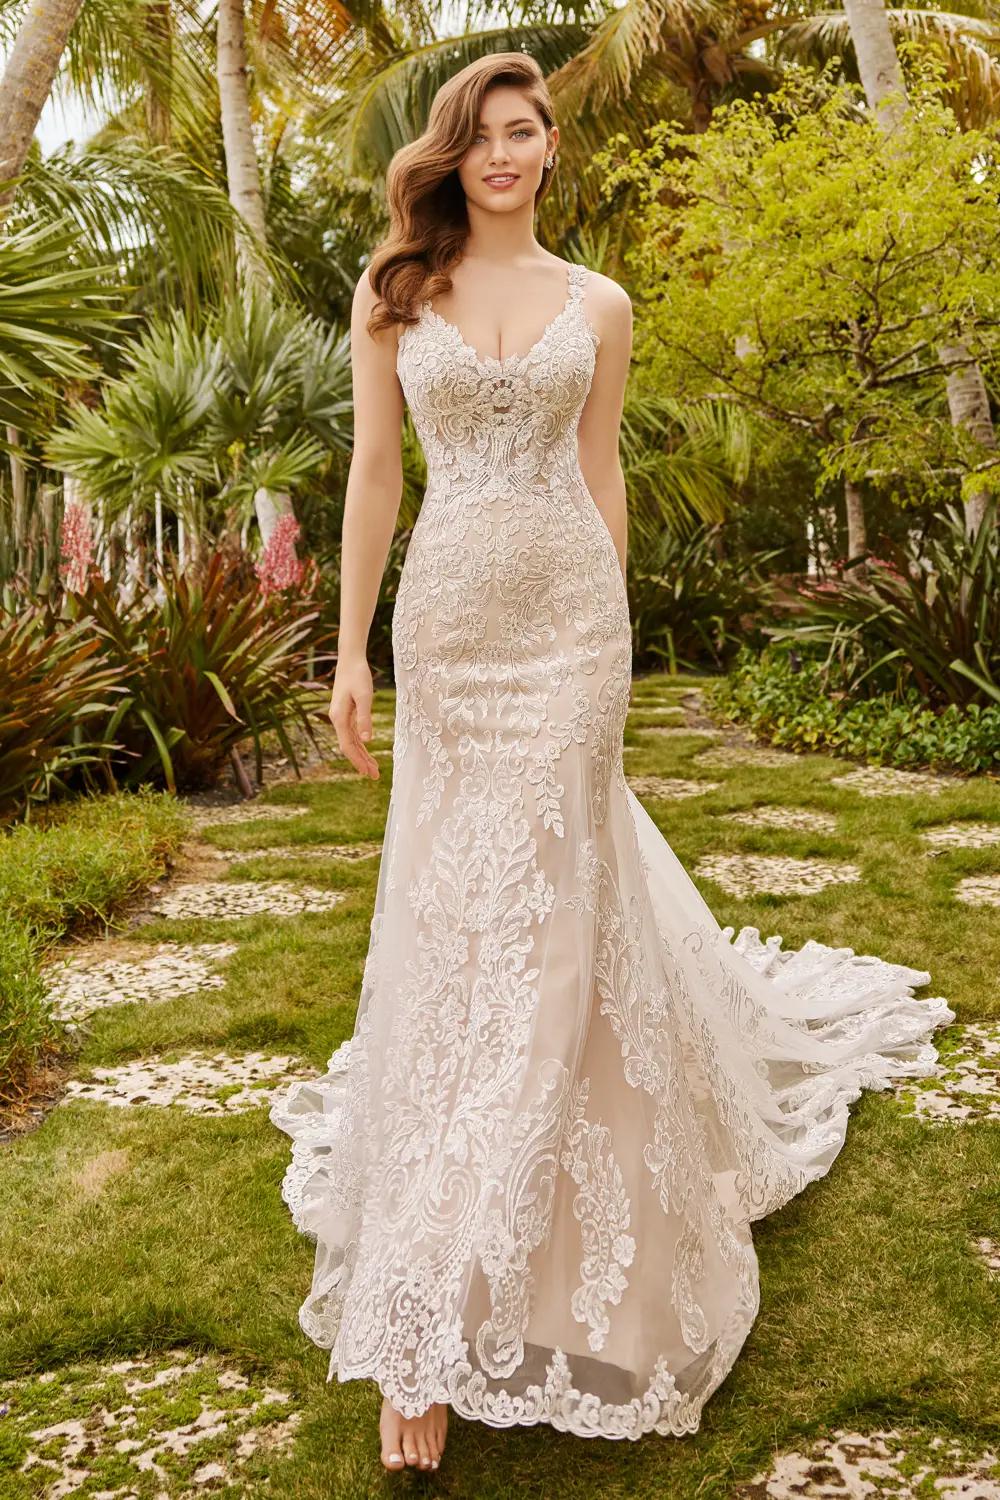 Sexy Spaghetti Strap Fit-and-Flare Wedding Dress in Embellished Lace